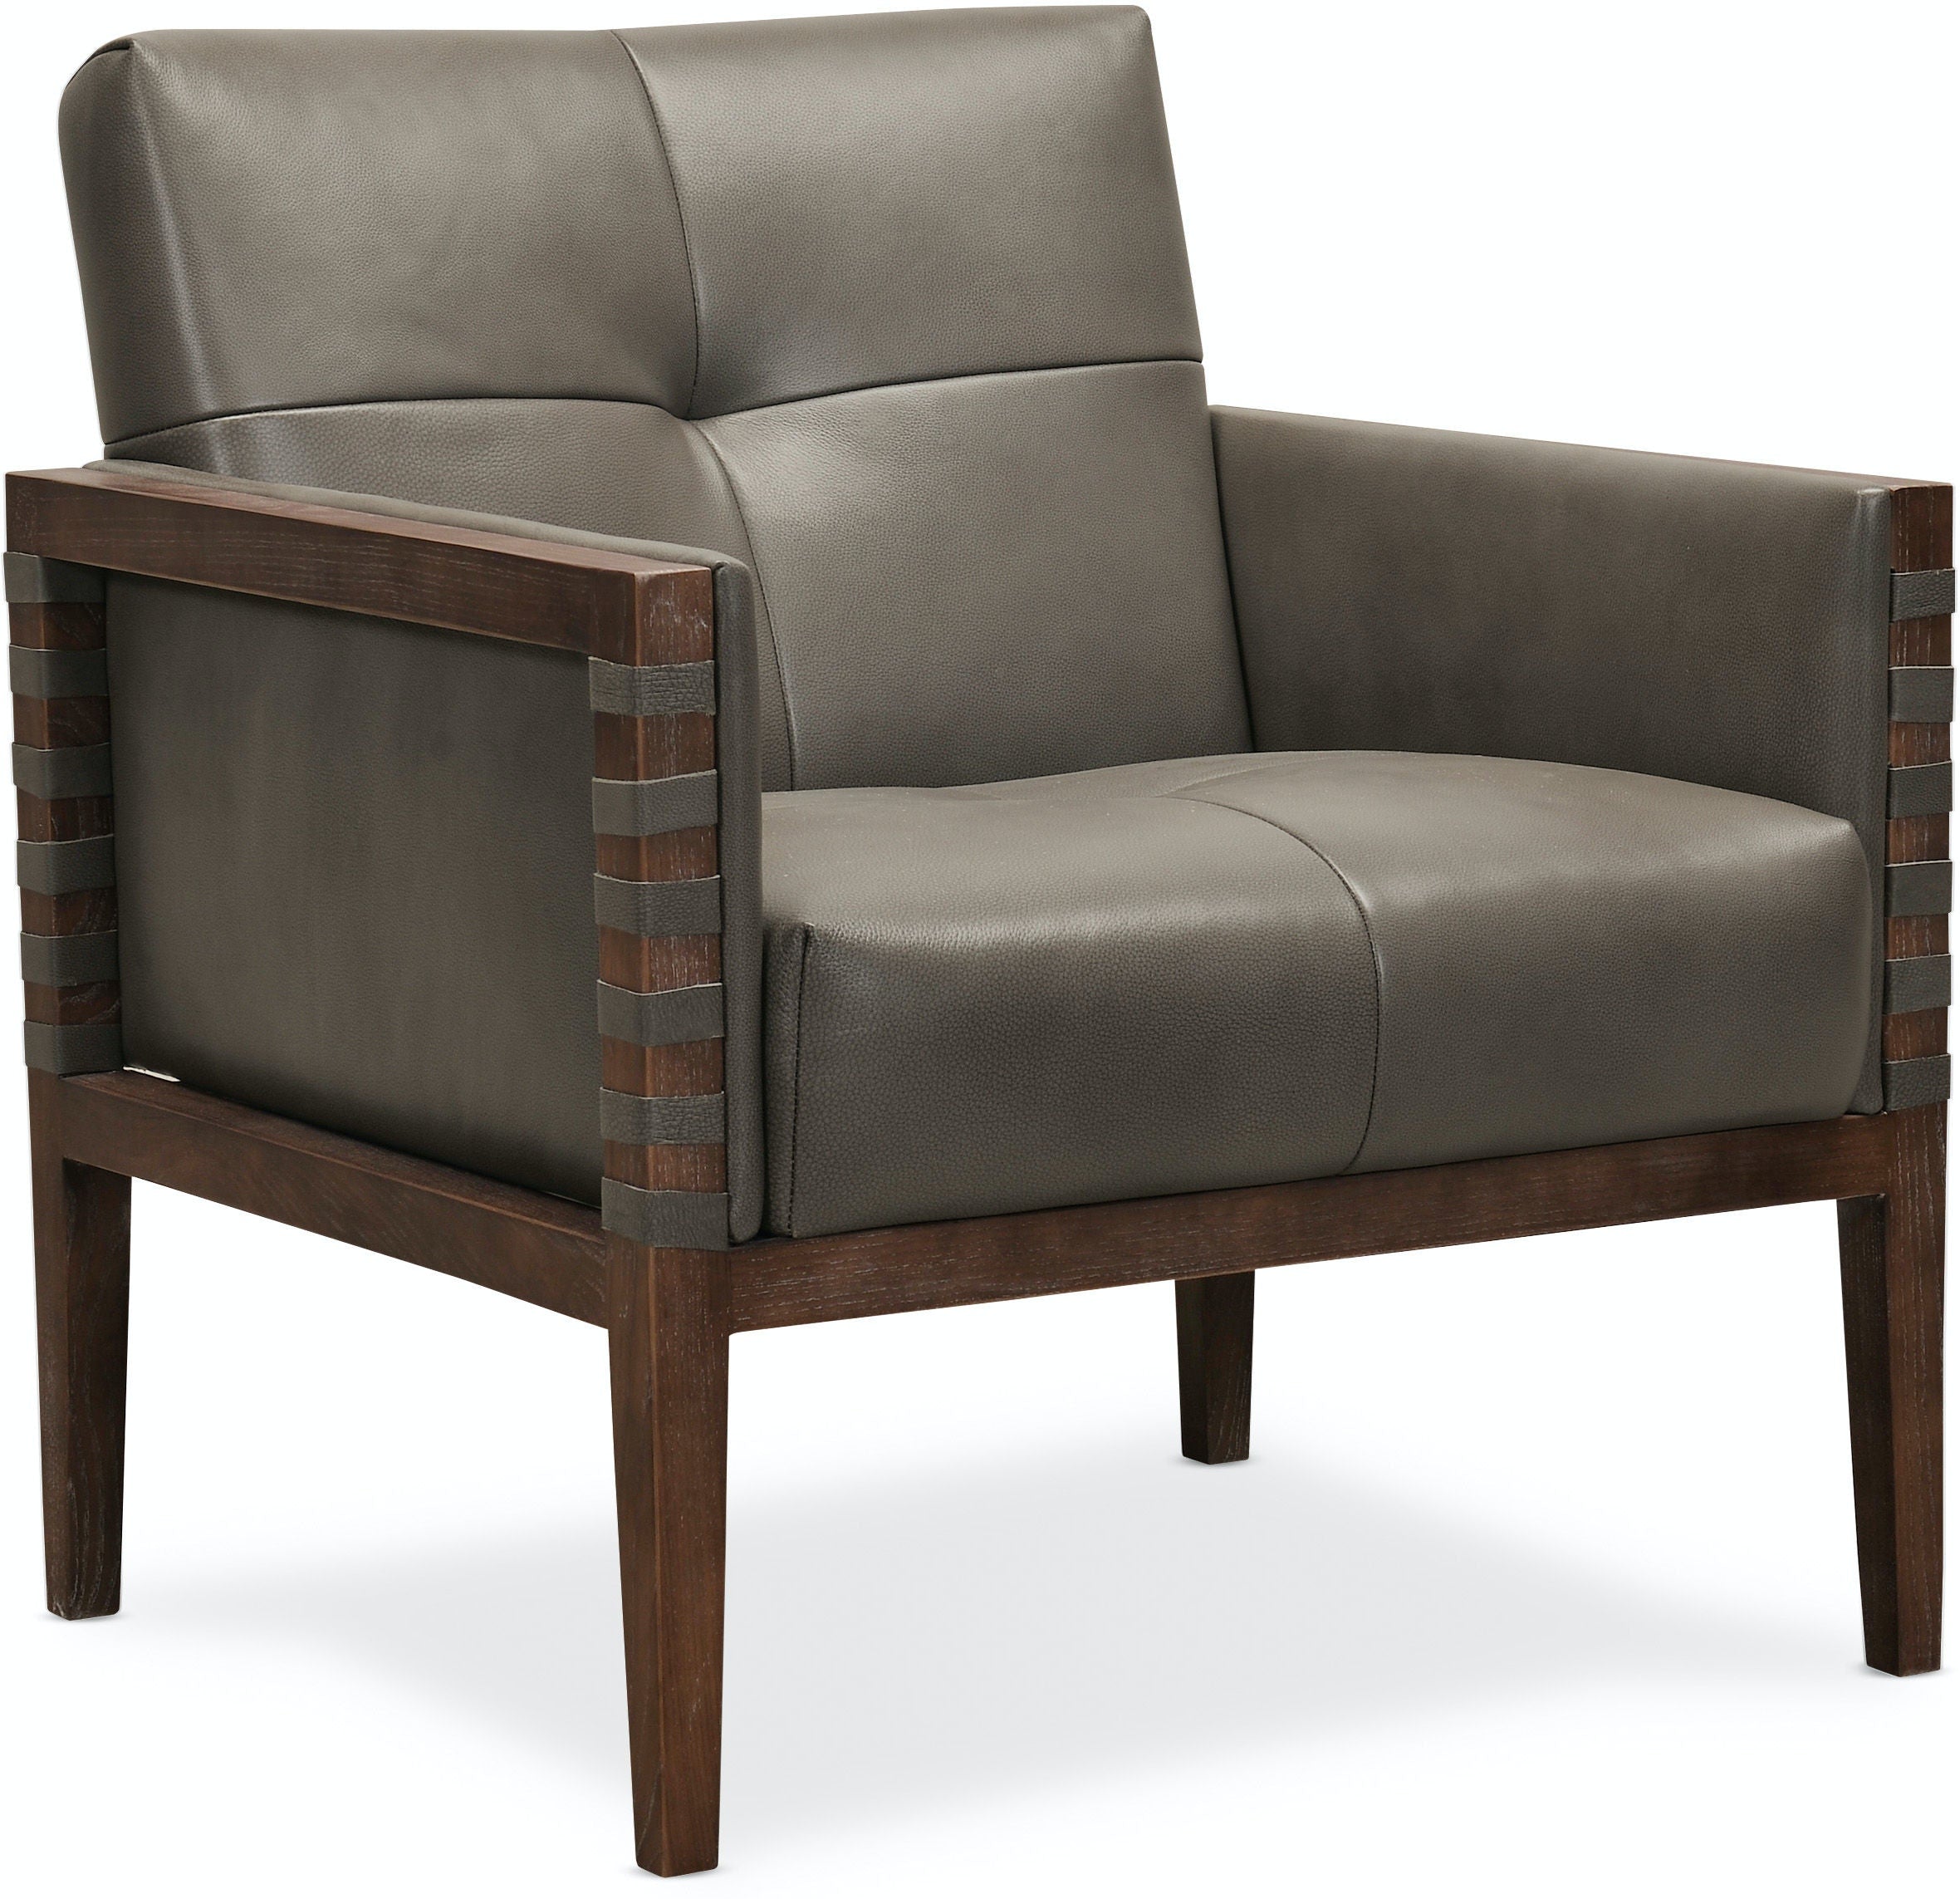 Grey Caverdale Leather Club Chair with Wood Frame